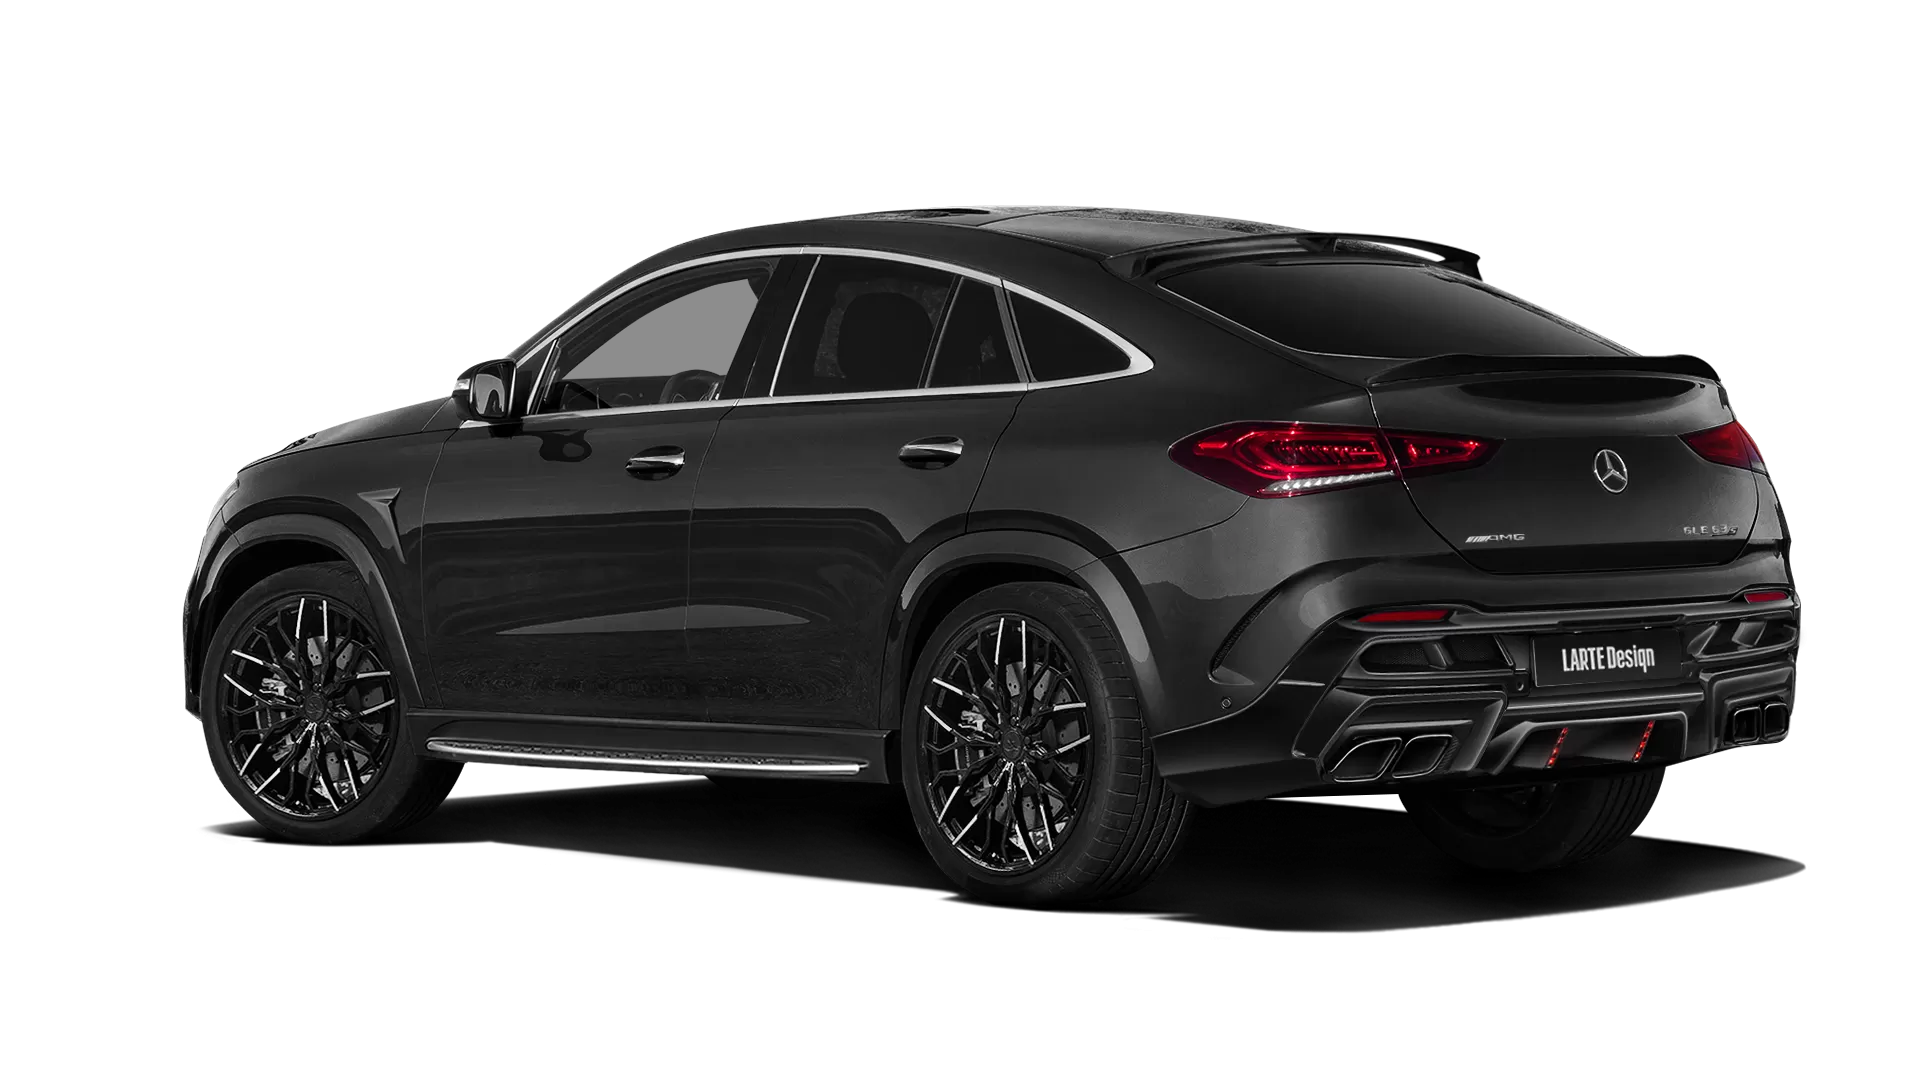 Mercedes GLE Coupe AMG 63 C167 with painted body kit: rear view shown in Black Non-Metallic